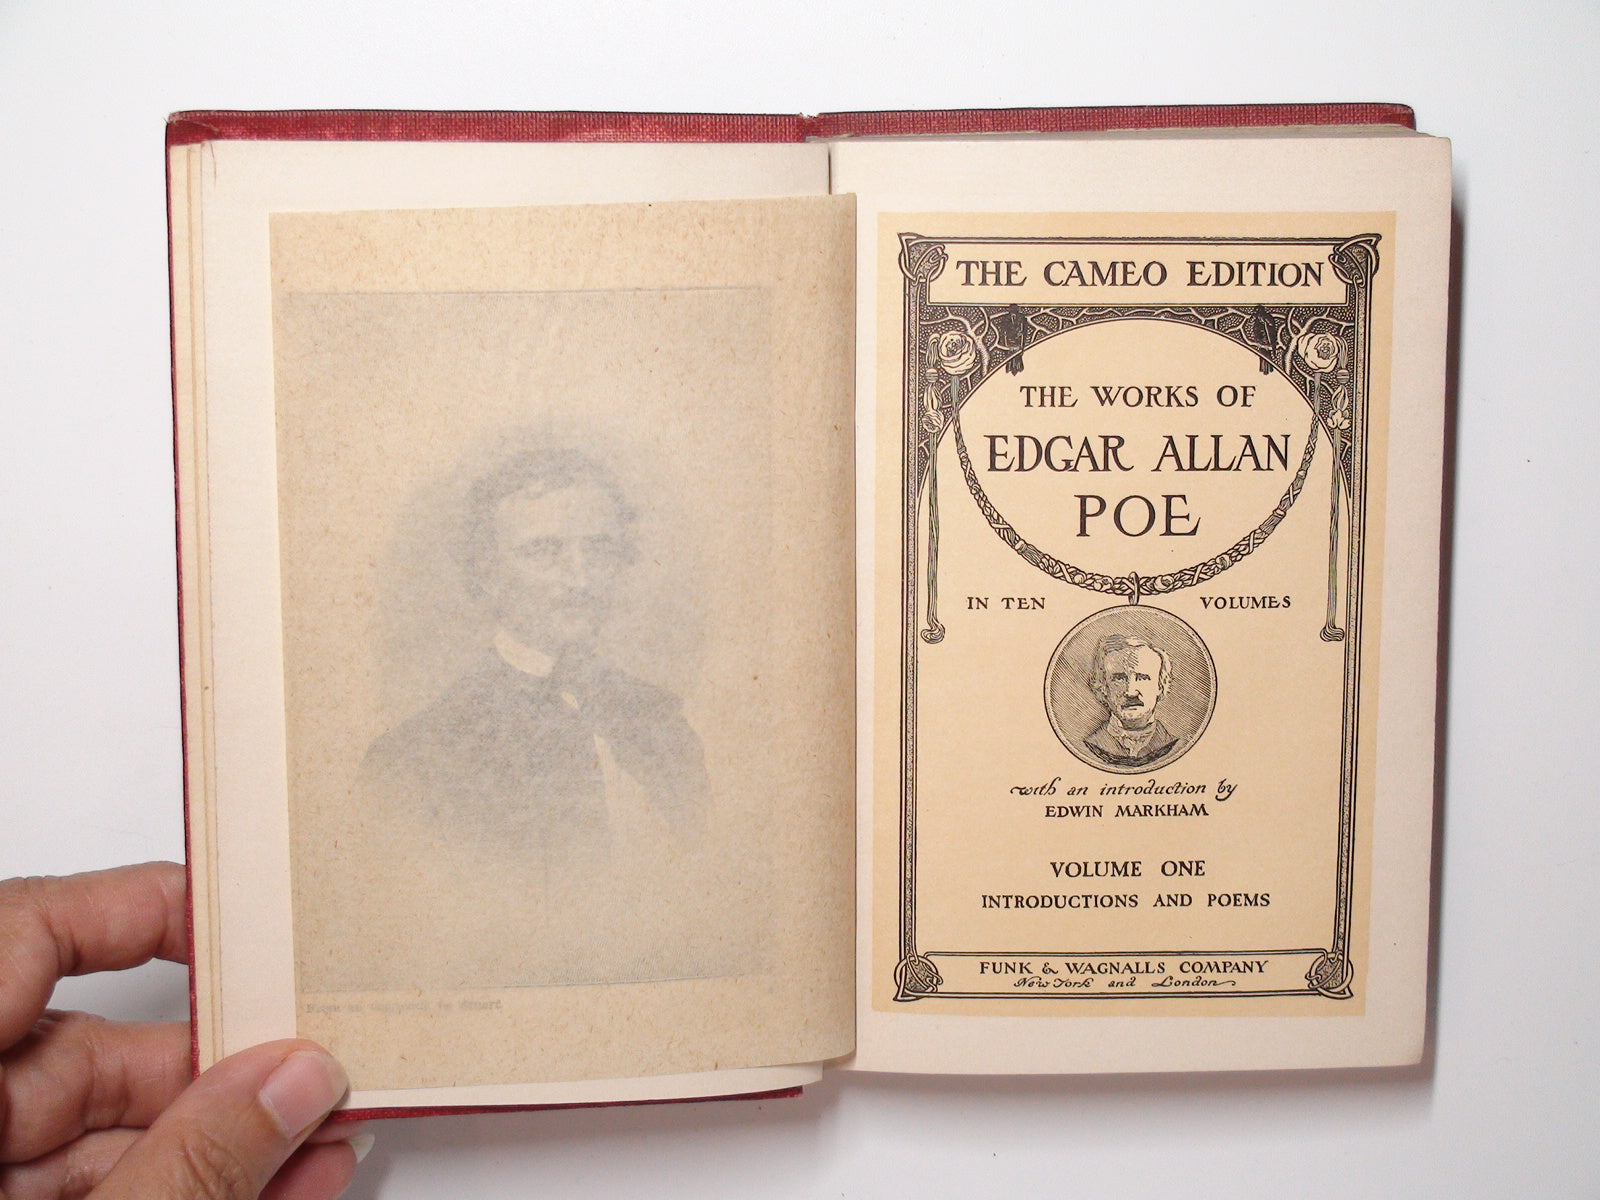 The Cameo Edition of the Works of Edgar Allan Poe, Vol 1-3, 9, 10, 1904